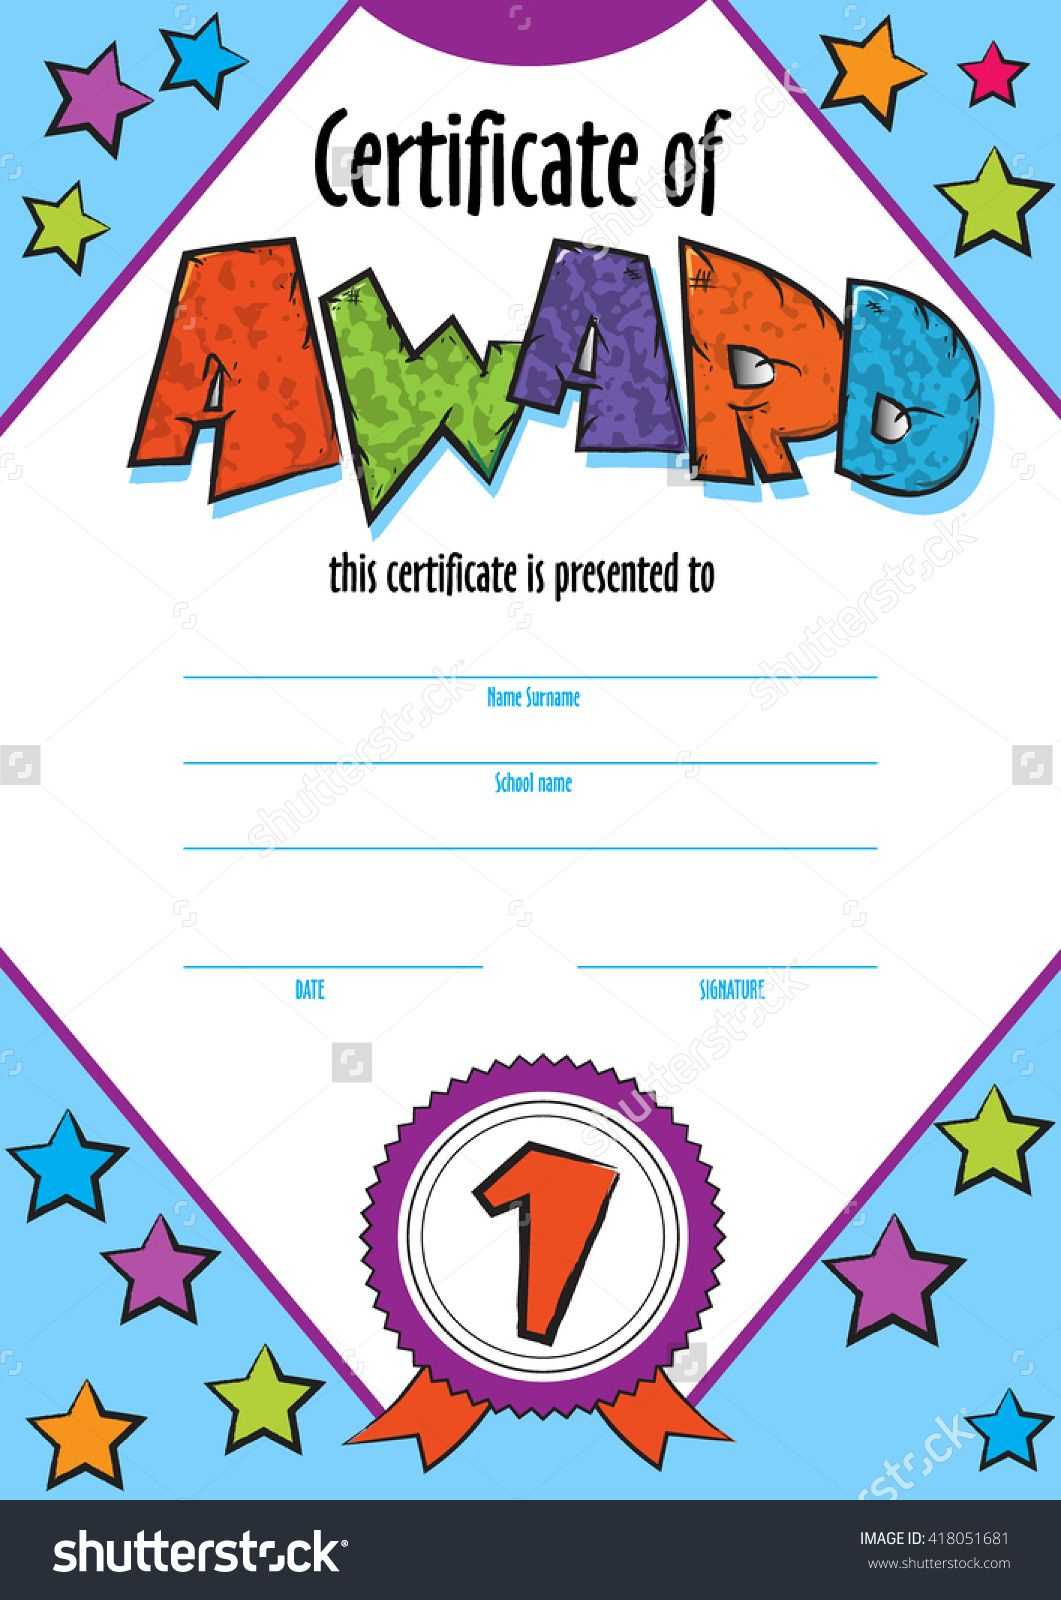 Template Child Certificate To Be Awarded. Kindergarten In Free Kids Certificate Templates